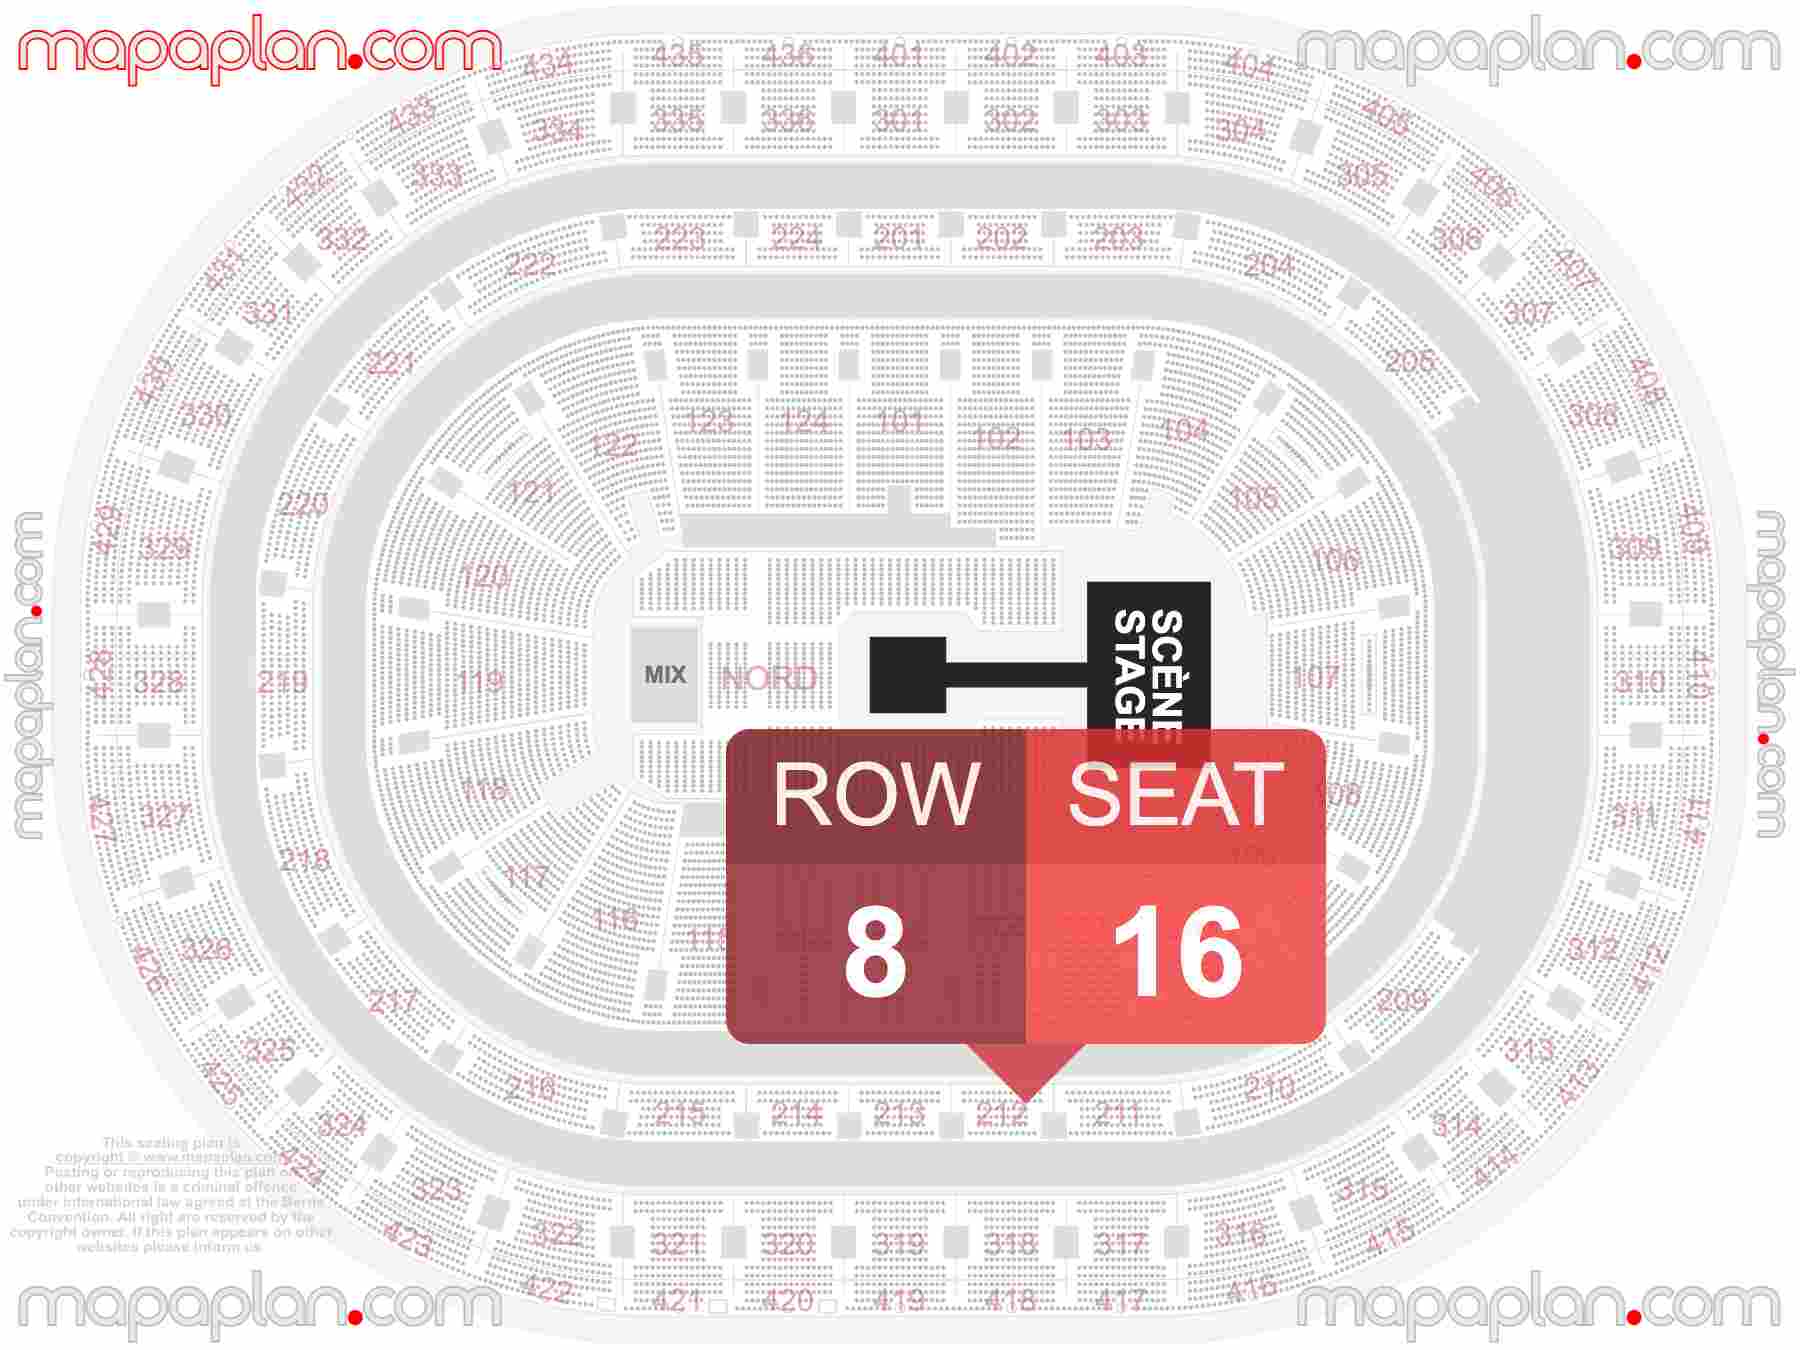 Montreal Bell Centre seating map Concert with extended catwalk runway B-stage seating map with exact section numbers showing best rows and seats selection 3d layout - Best interactive seat finder tool with precise detailed location data